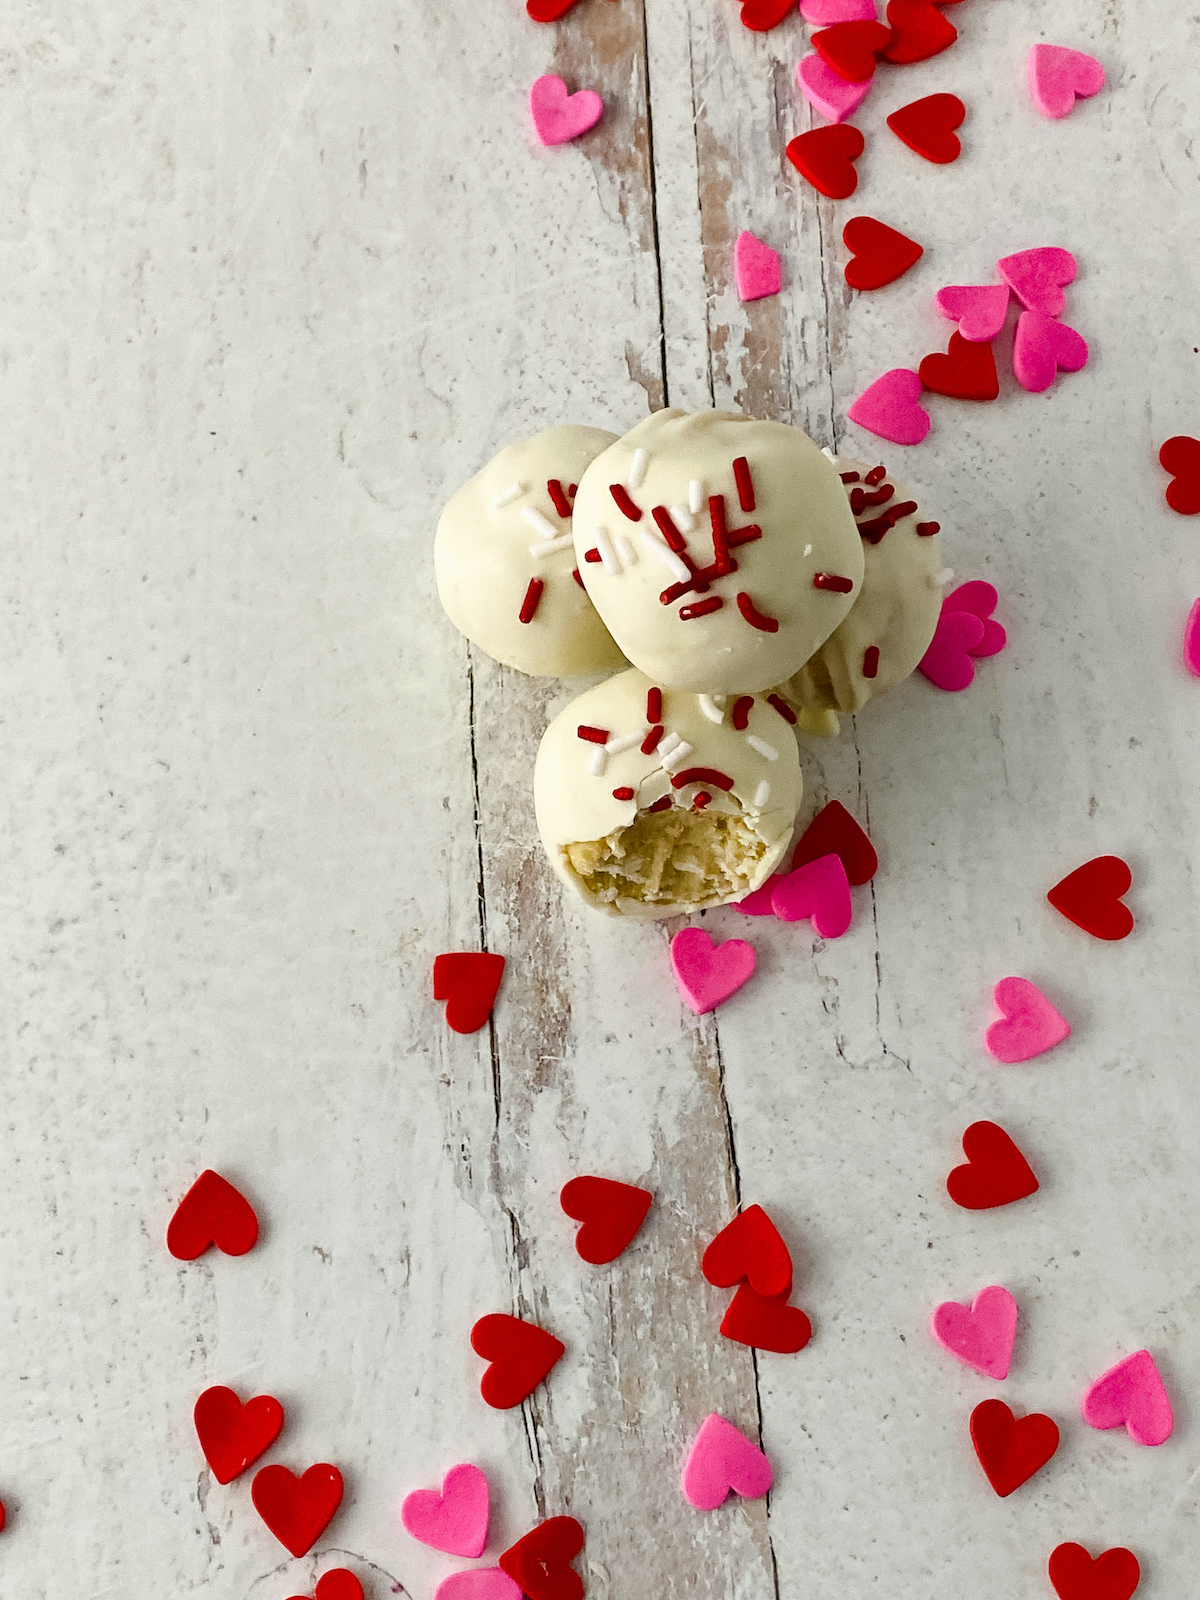 Cookie dough balls dipped in white chocolate and decorated with Valentine's Day sprinkles on a white table.